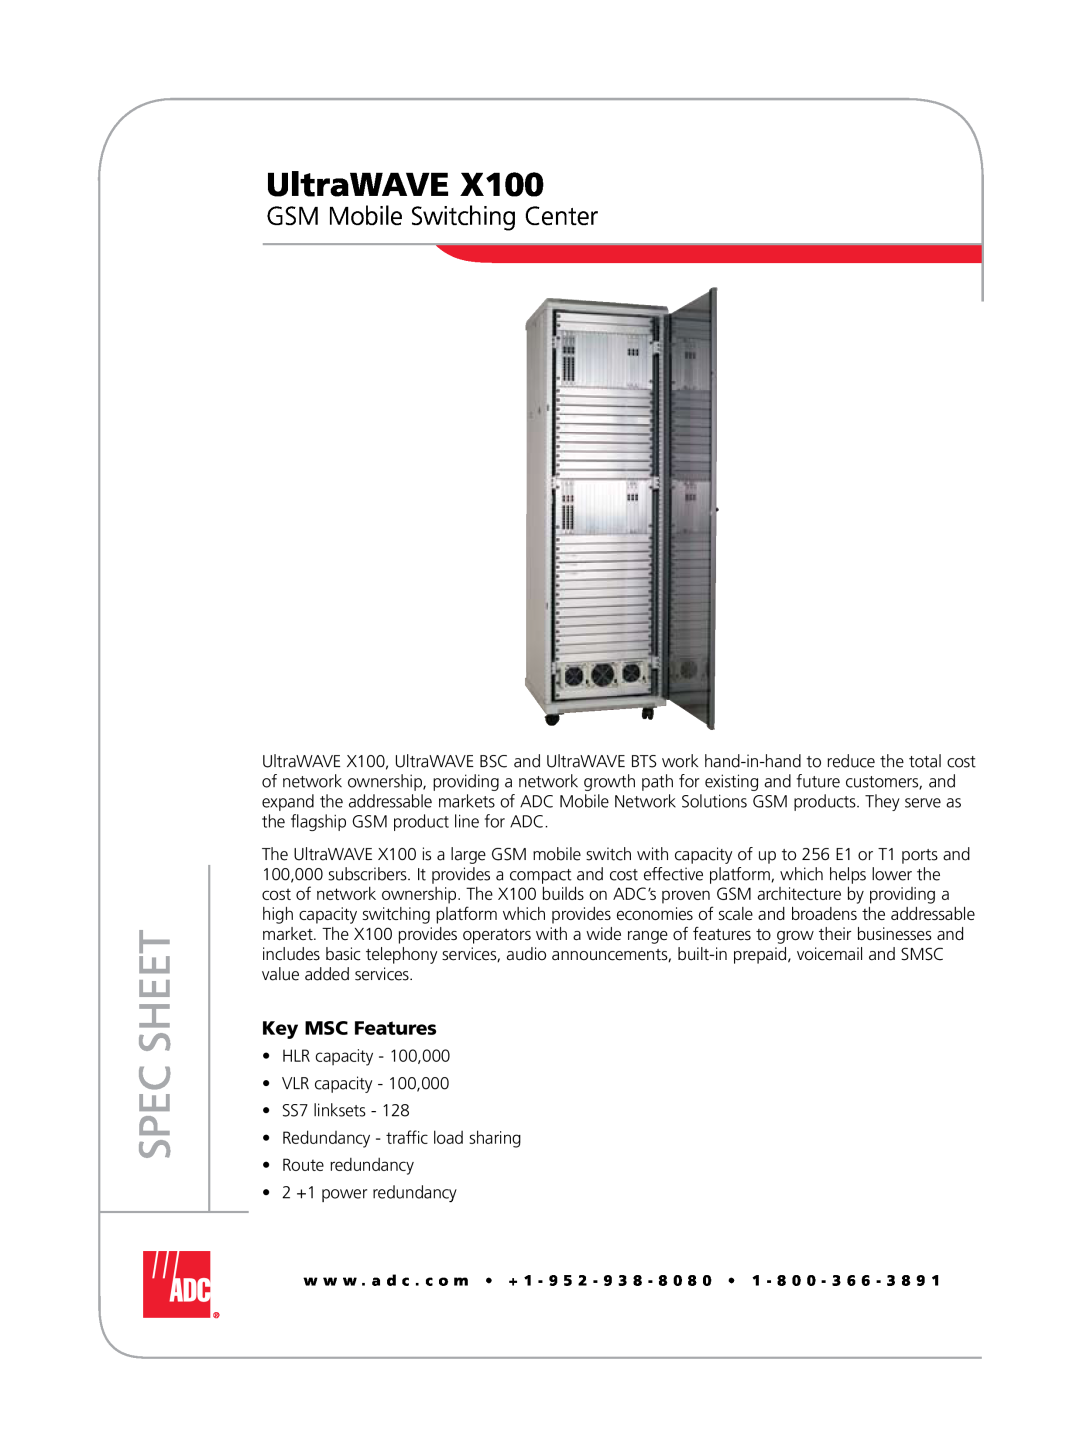 ADC UltraWAVE X100 manual GSM Mobile Switching Center, Spec Sheet, Key MSC Features 